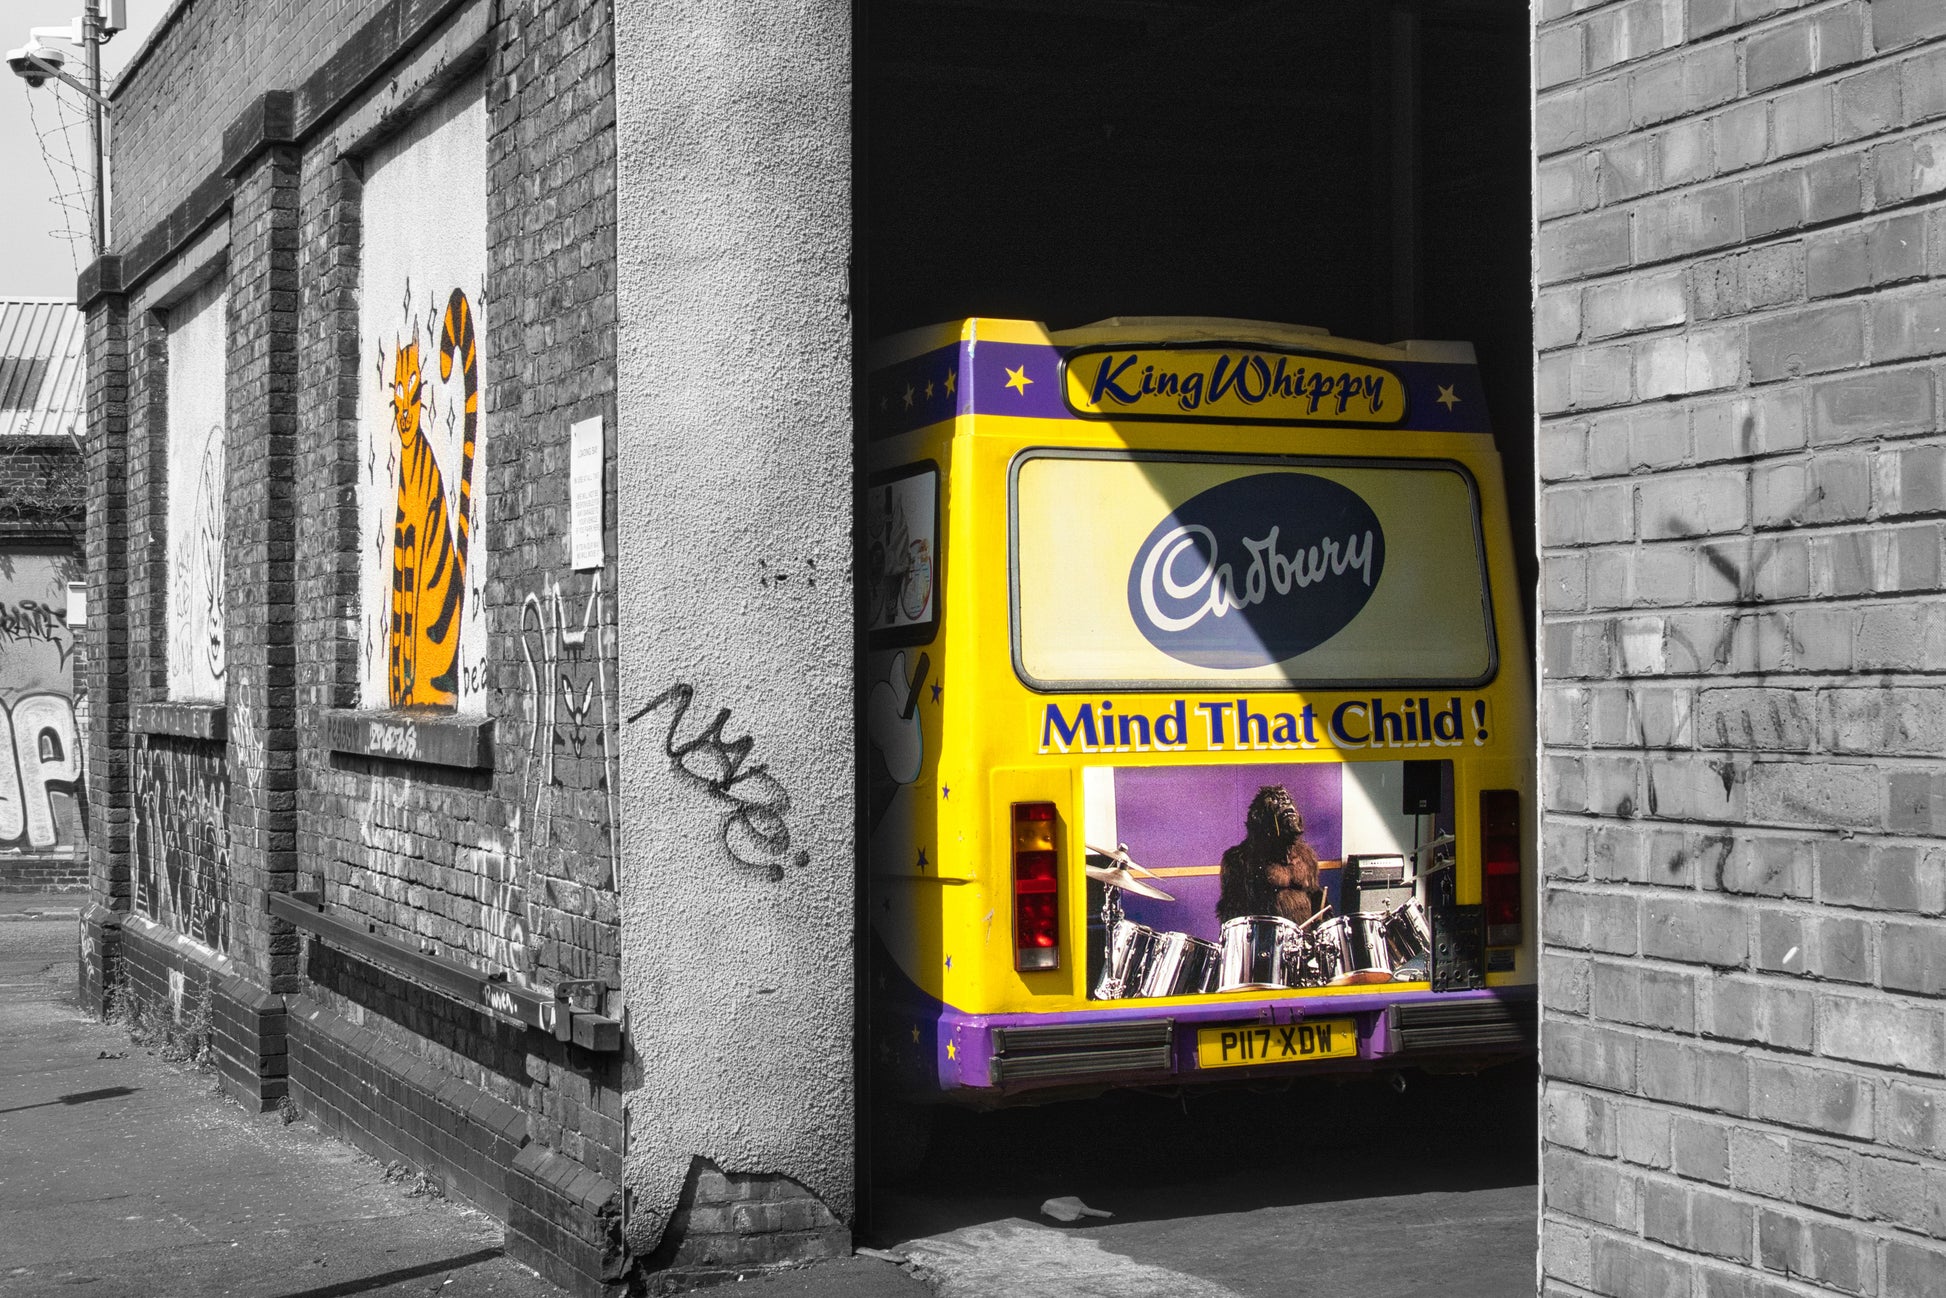 Liverpool Baltic Triangle Photo and Images -Liverpool Graffiti - The Ice Cream Van - PTI07417 - Photo by Photographer Martin Fisher - Picture The Image